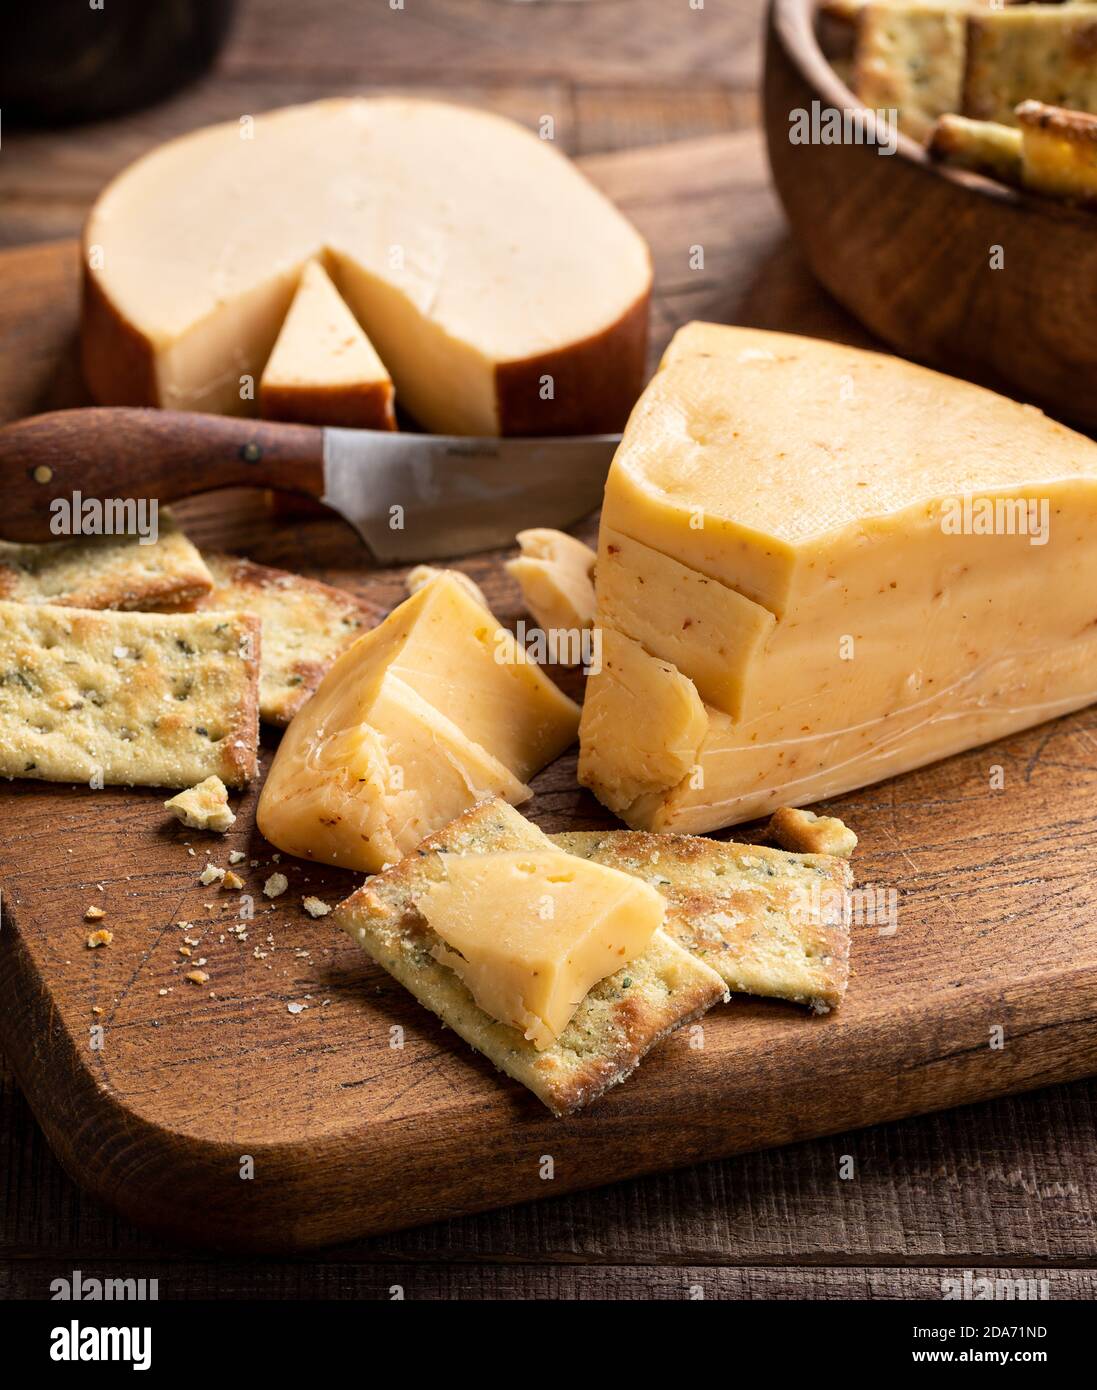 Gouda cheese and crackers on a rustic cutting board Stock Photo